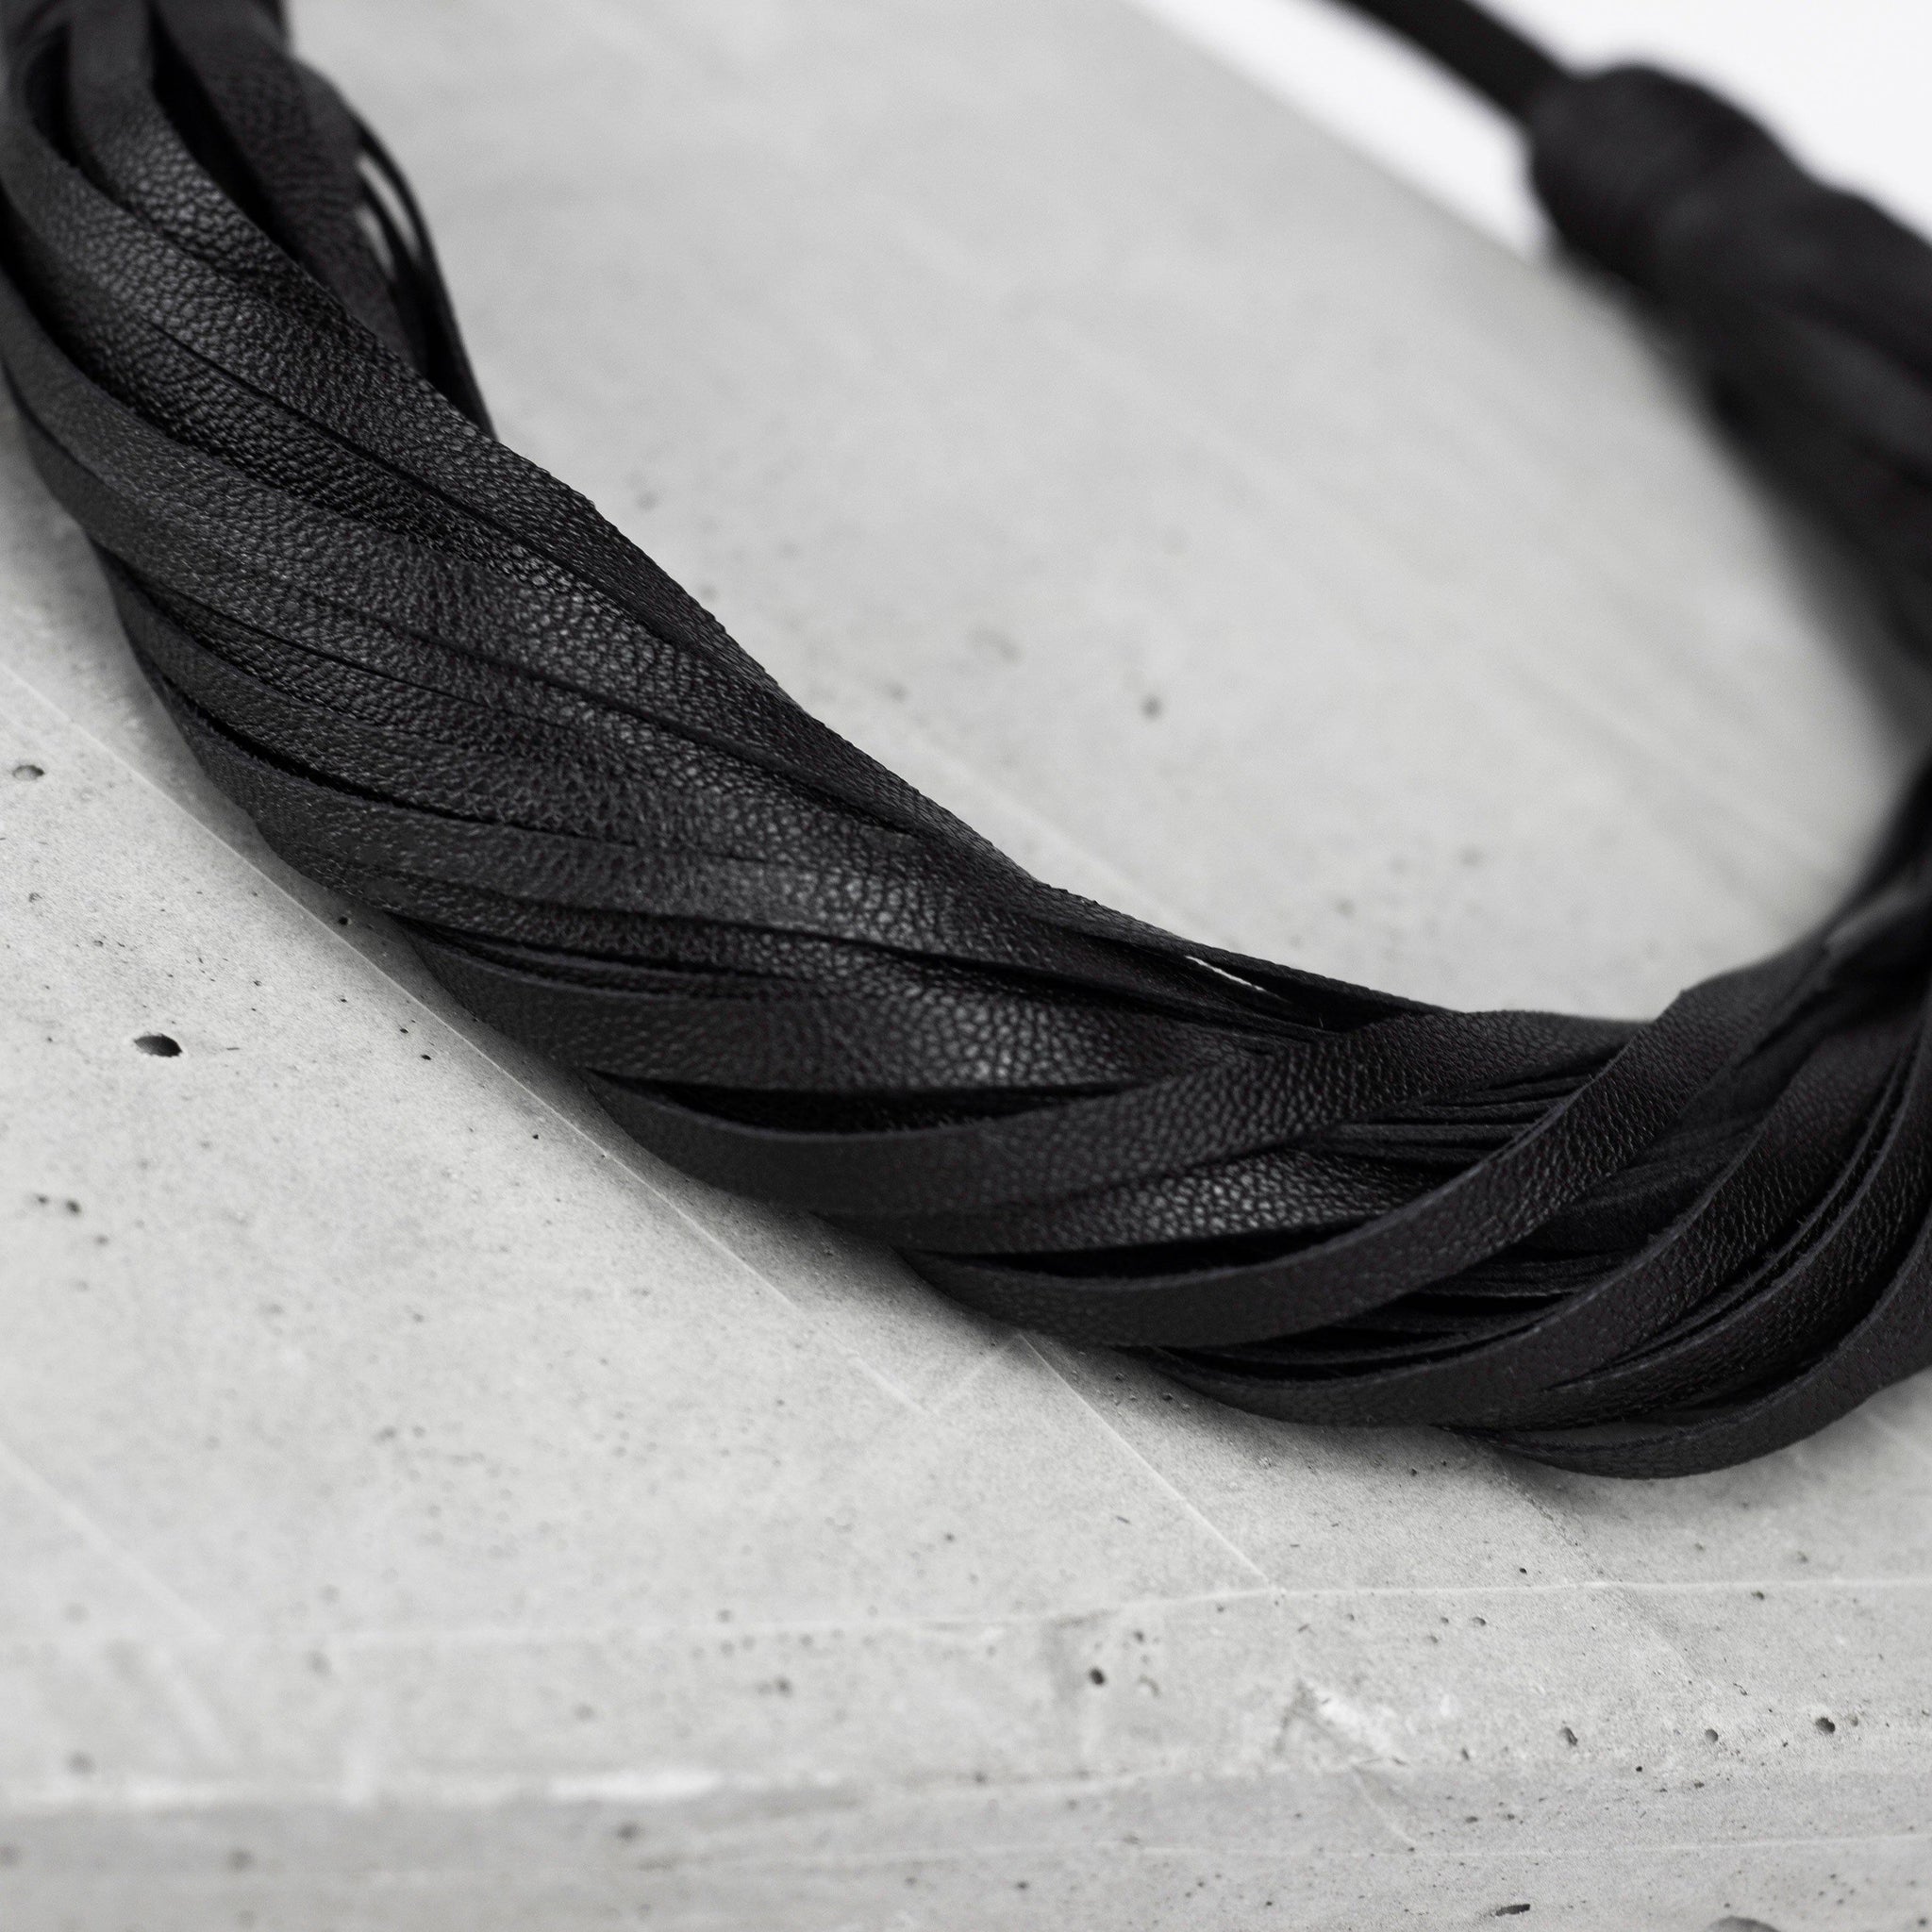 Black genuine leather and rope necklace / multistrand recycled leather  neckpiece / statement twisted fringe collar – MIMIKRI Design